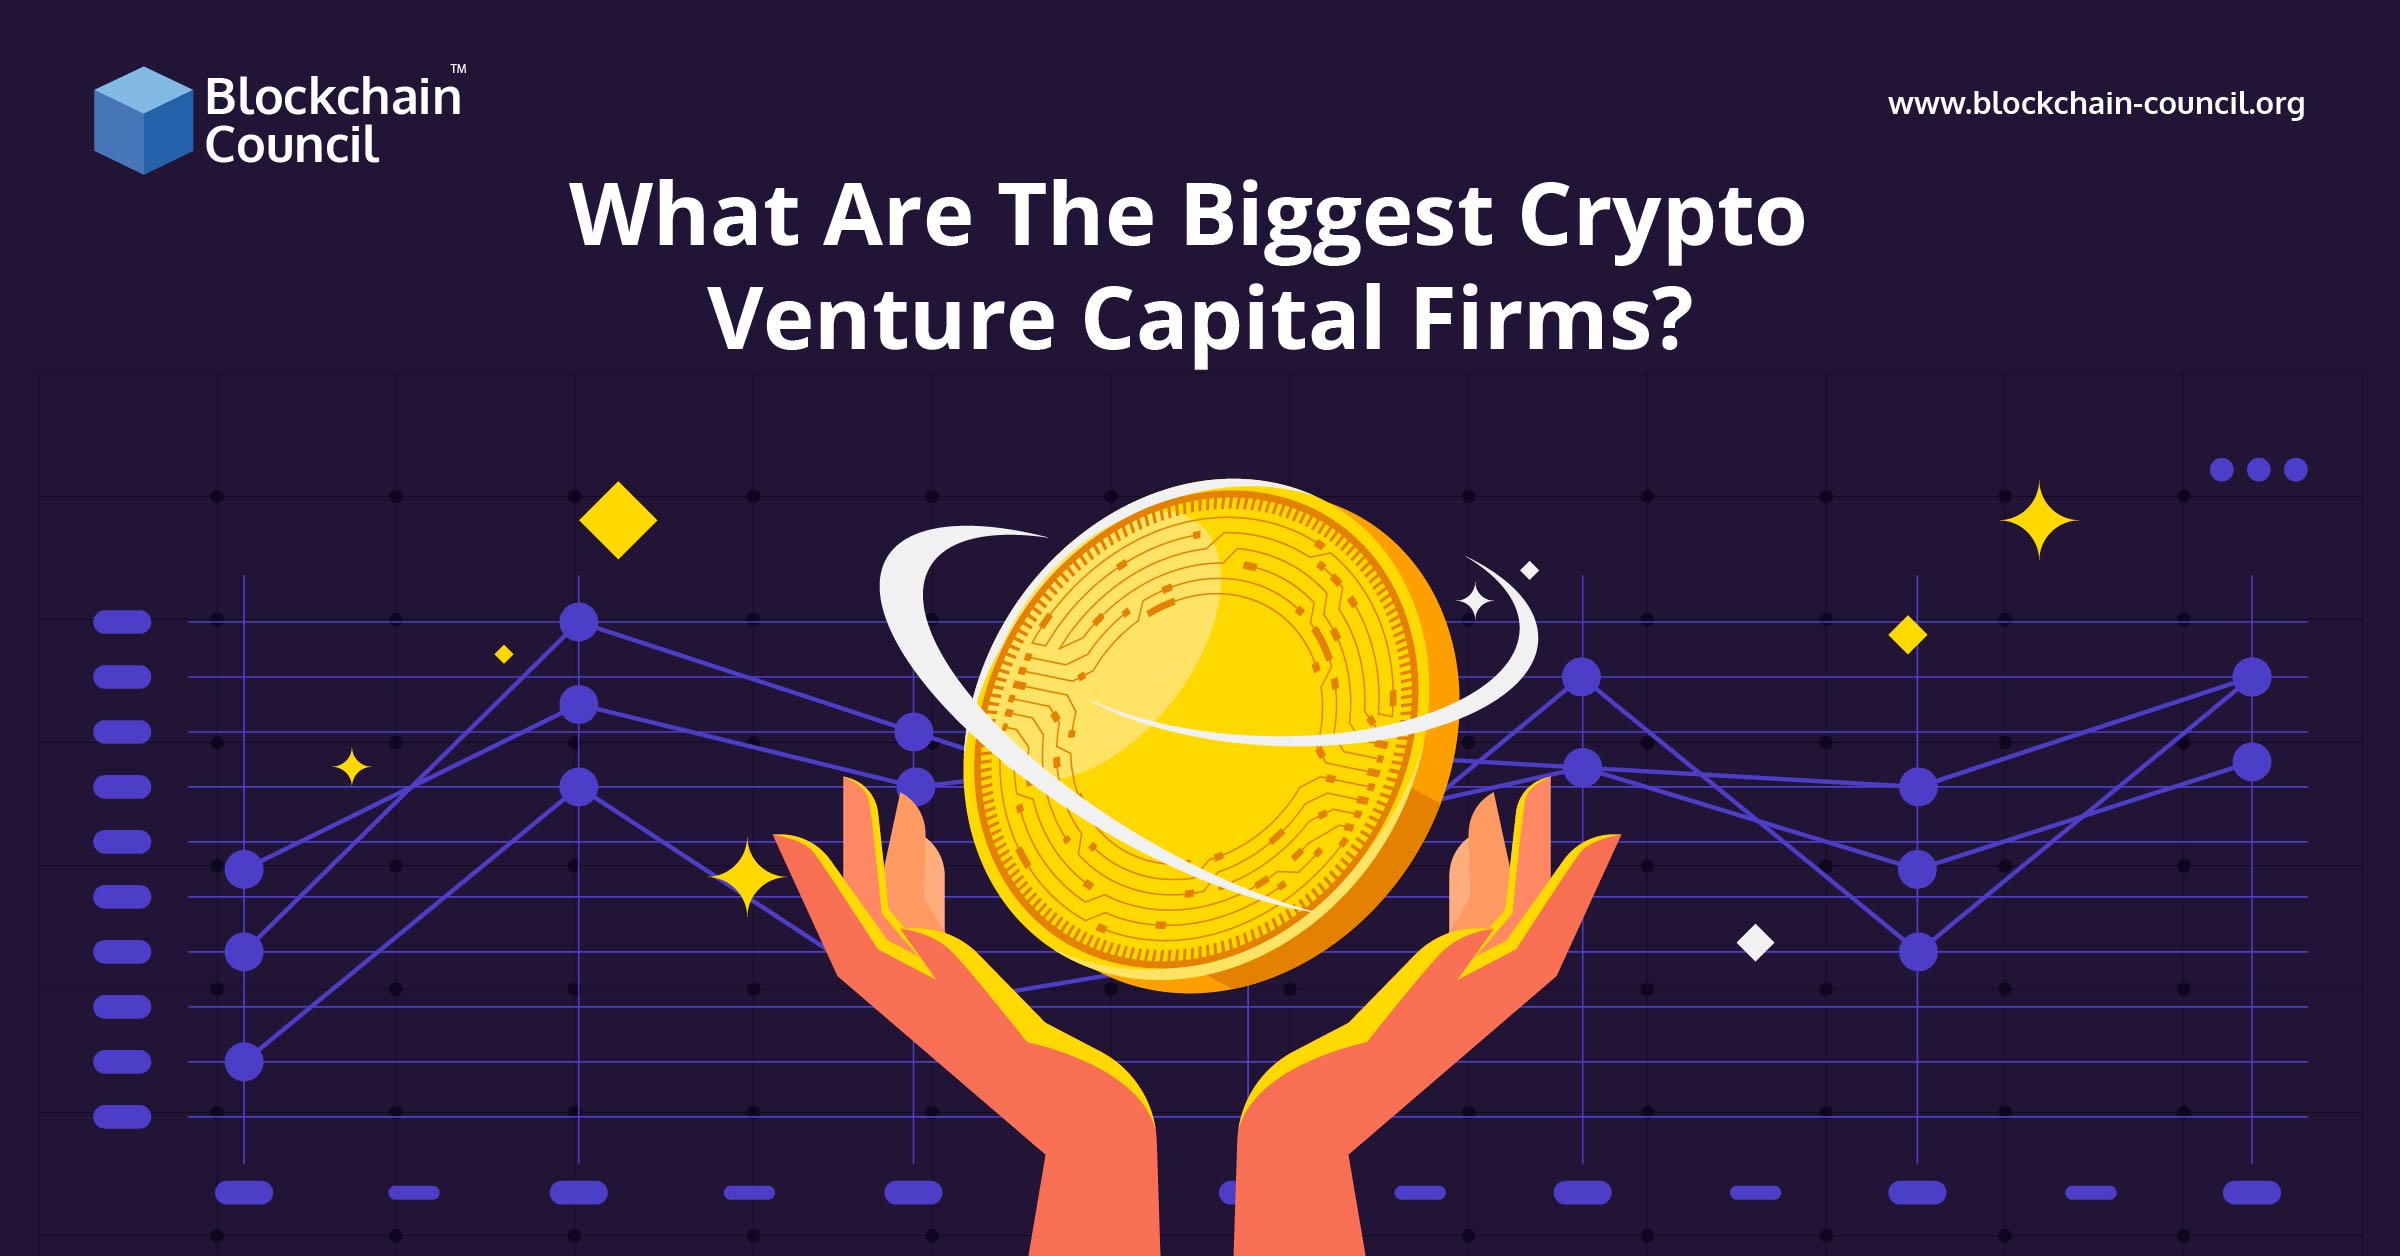 What Are The Biggest Crypto Venture Capital Firms